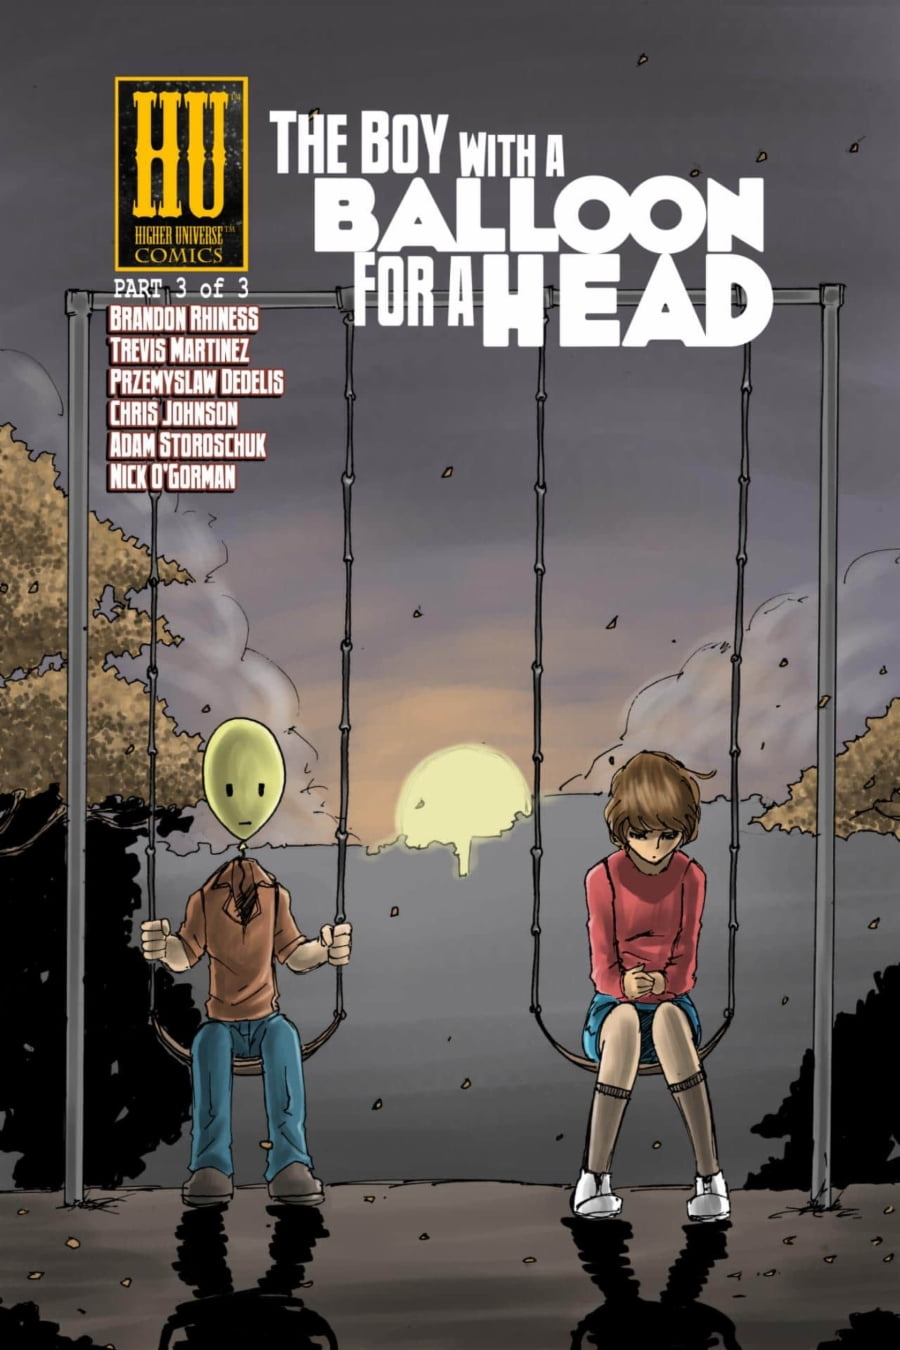 Higher Universe Comics | The Boy with a Balloon for a Head #3 page 1 | Spinwhiz Comics